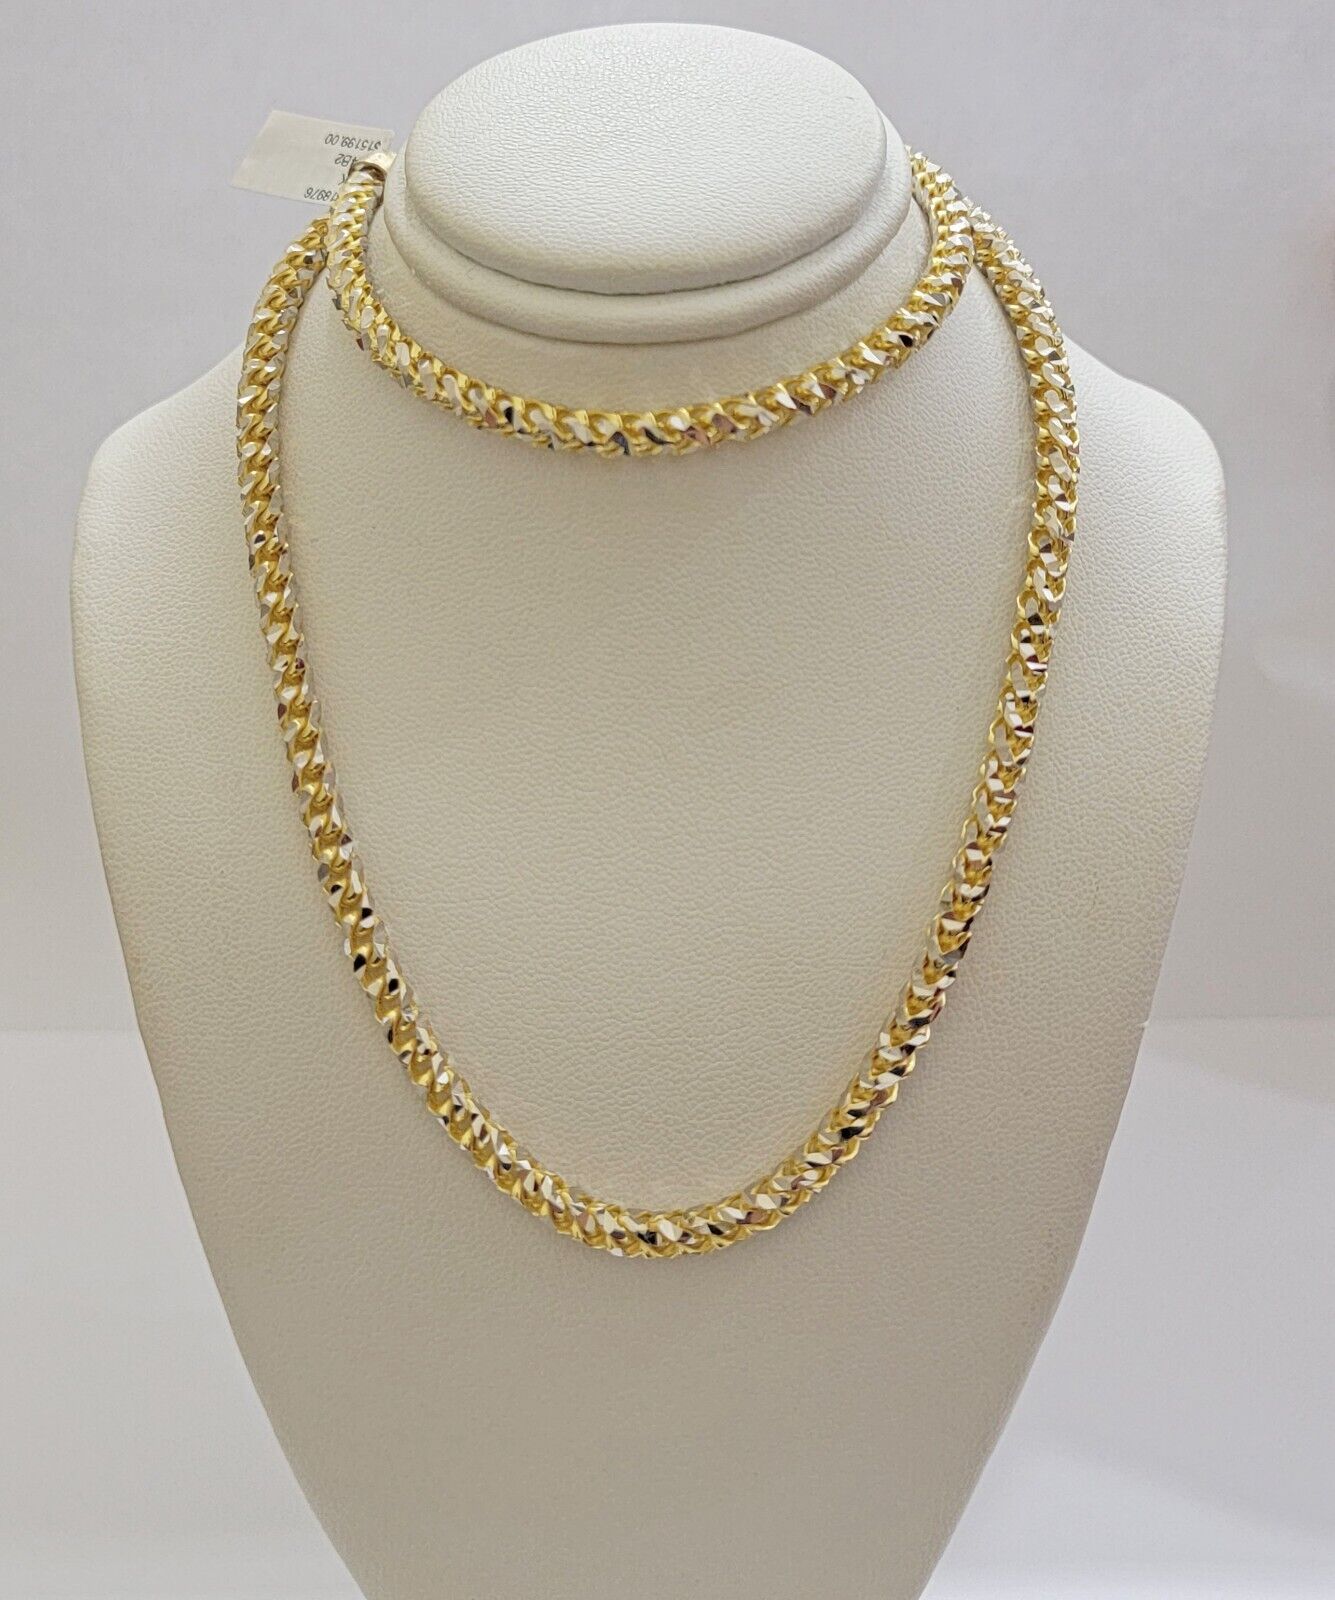 Solid 10k Yellow Gold Palm Box Chain Necklace Diamond cuts 4mm 26